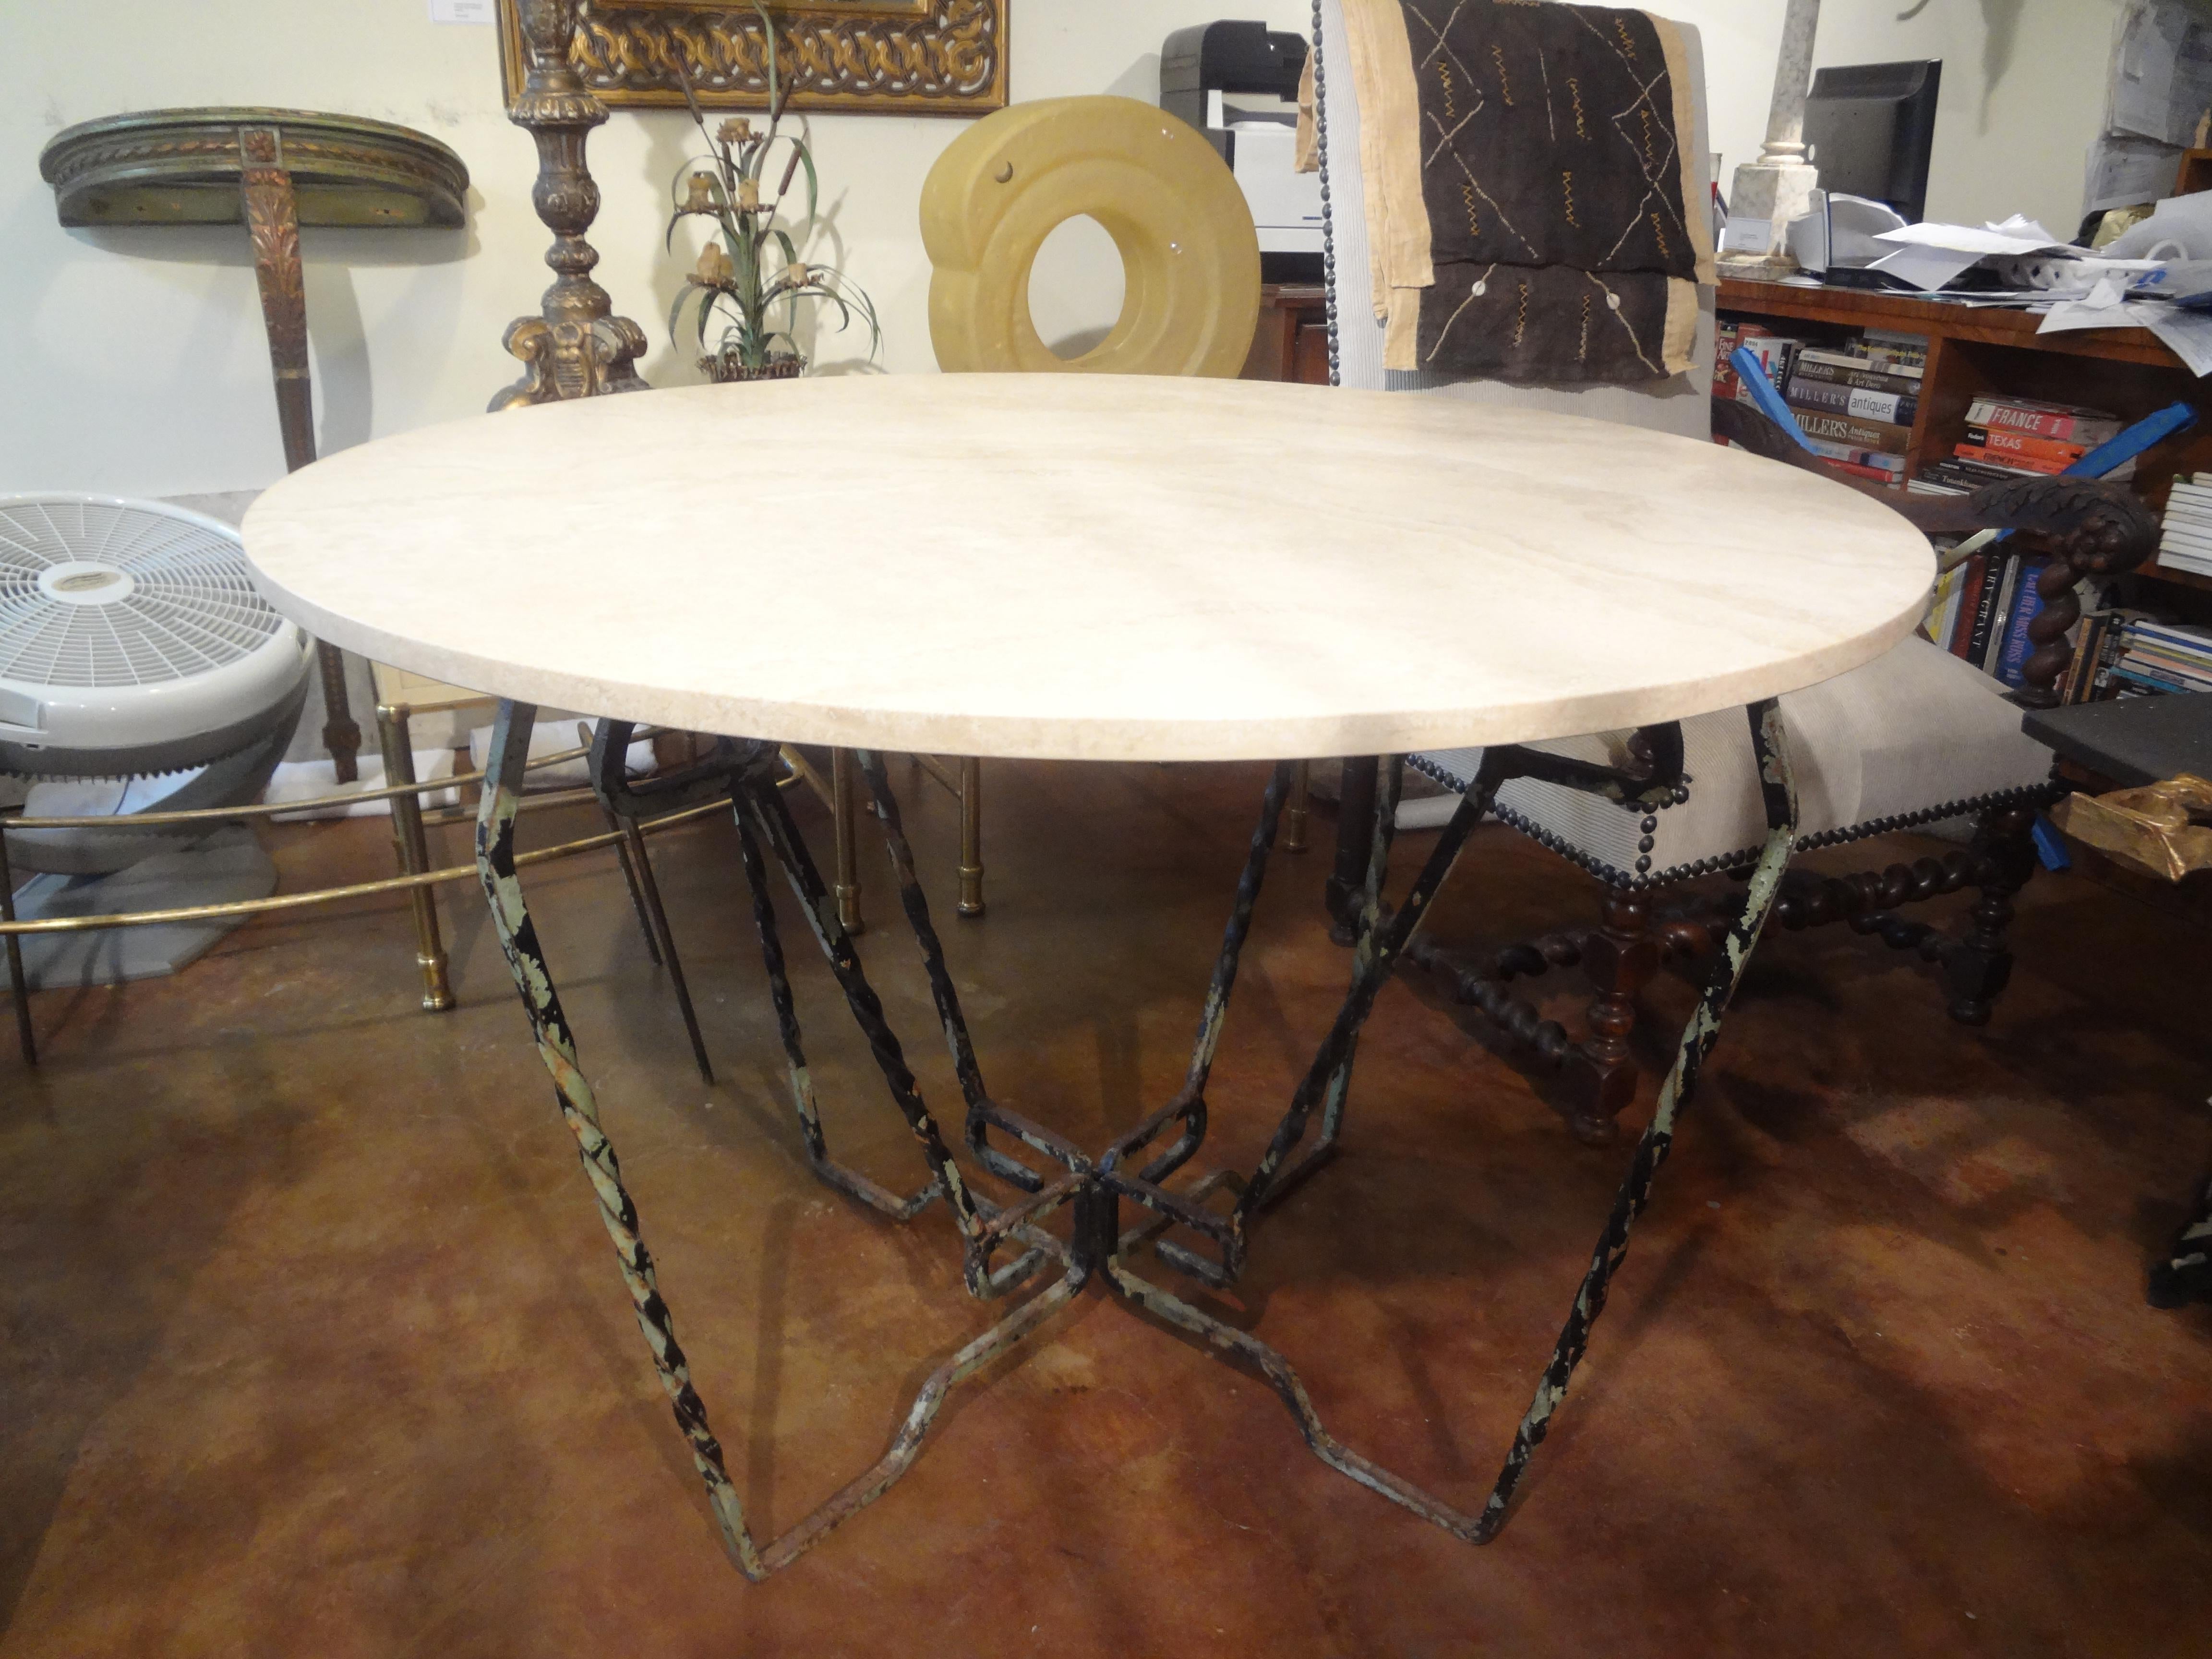 French Wrought Iron Table With Travertine Top.
Our French Neoclassical style hand forged wrought iron center table, dining table or garden table has a Greek key design and a beautiful honed 42 inch travertine top. The iron work has a fantastic